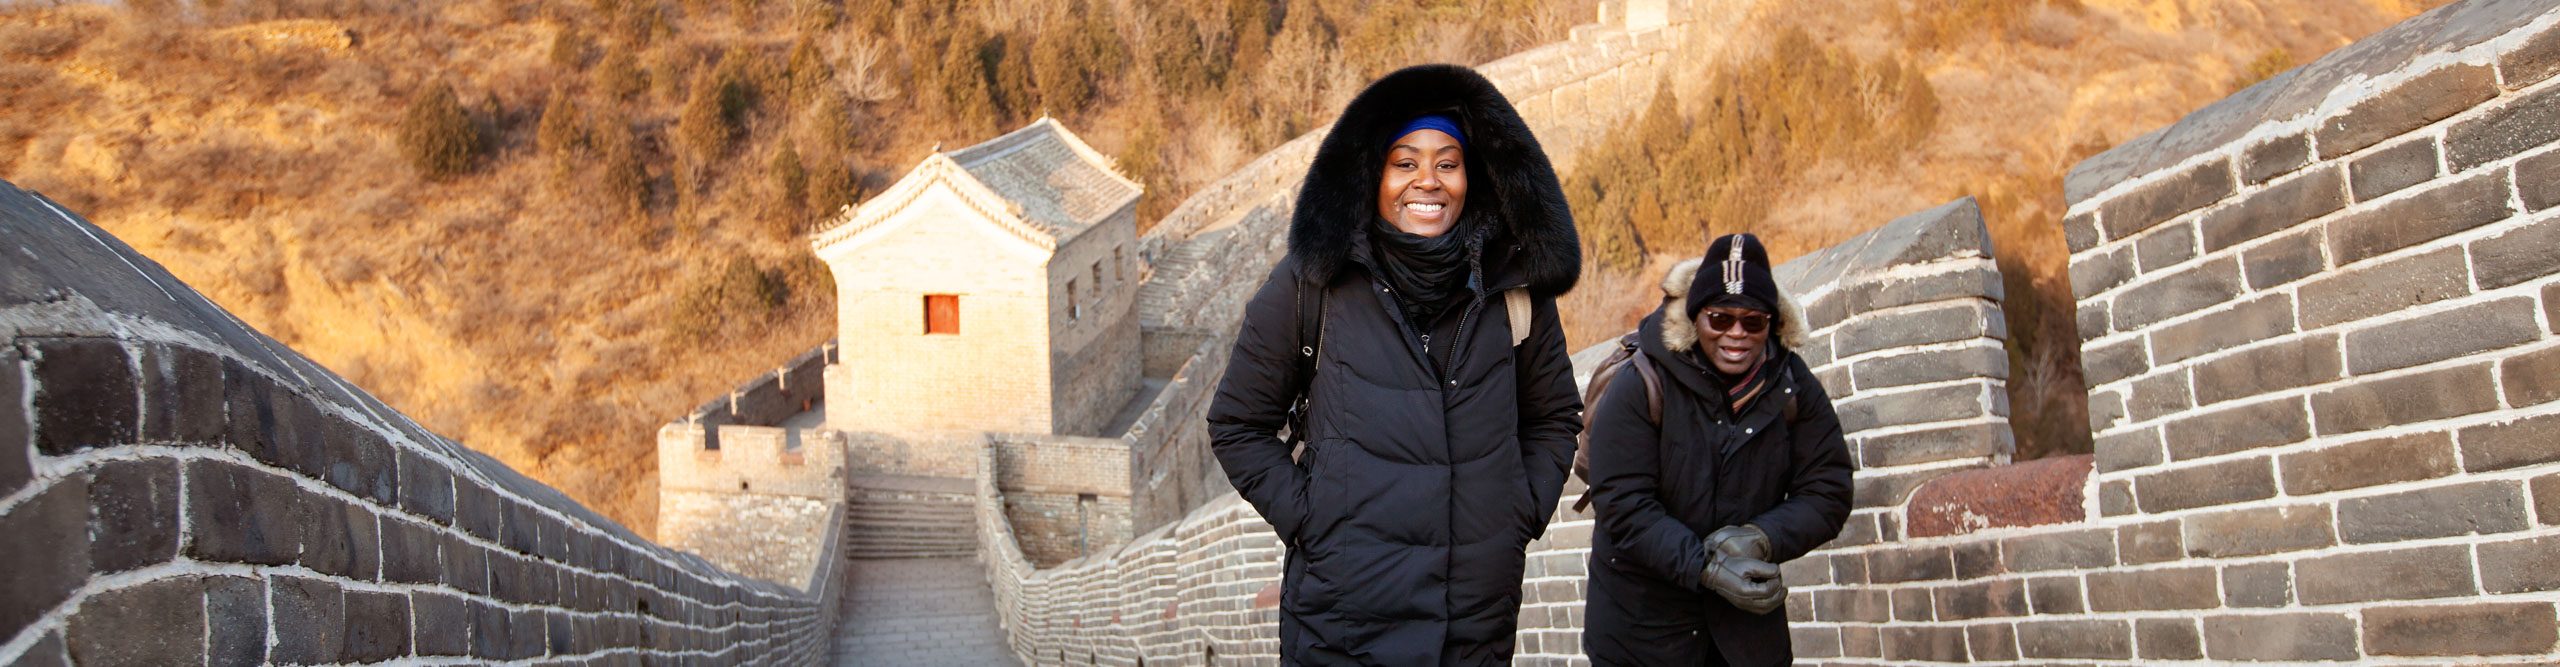 Travellers walking along the Great Wall of China in the sun on a cold day